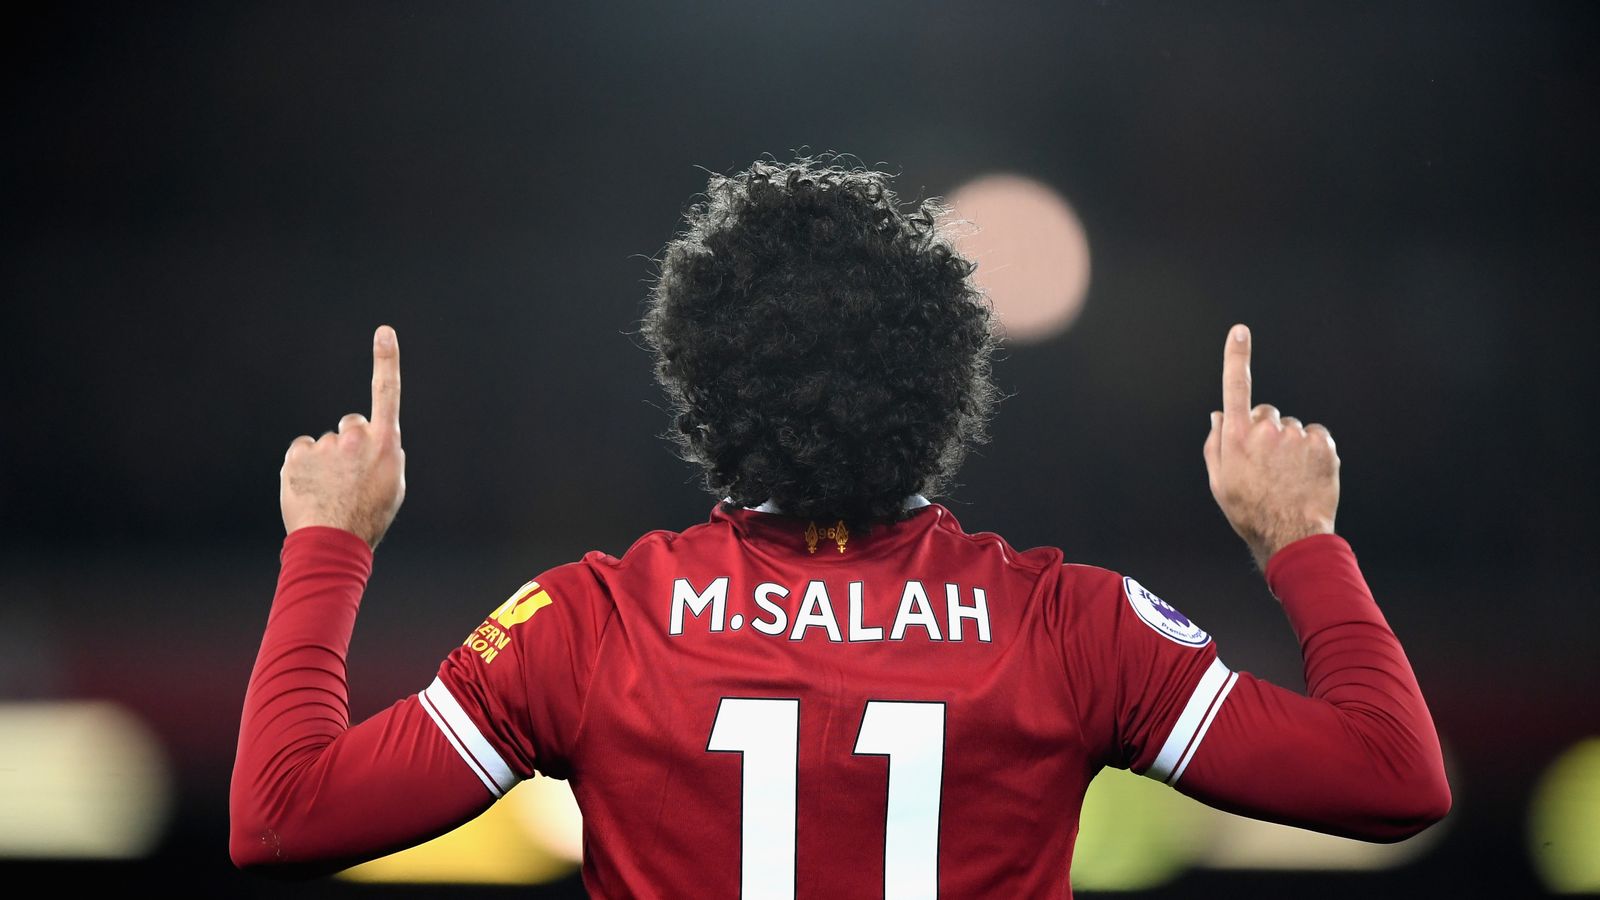 Mohamed Salah's transformation from Chelsea misfit to Liverpool hit